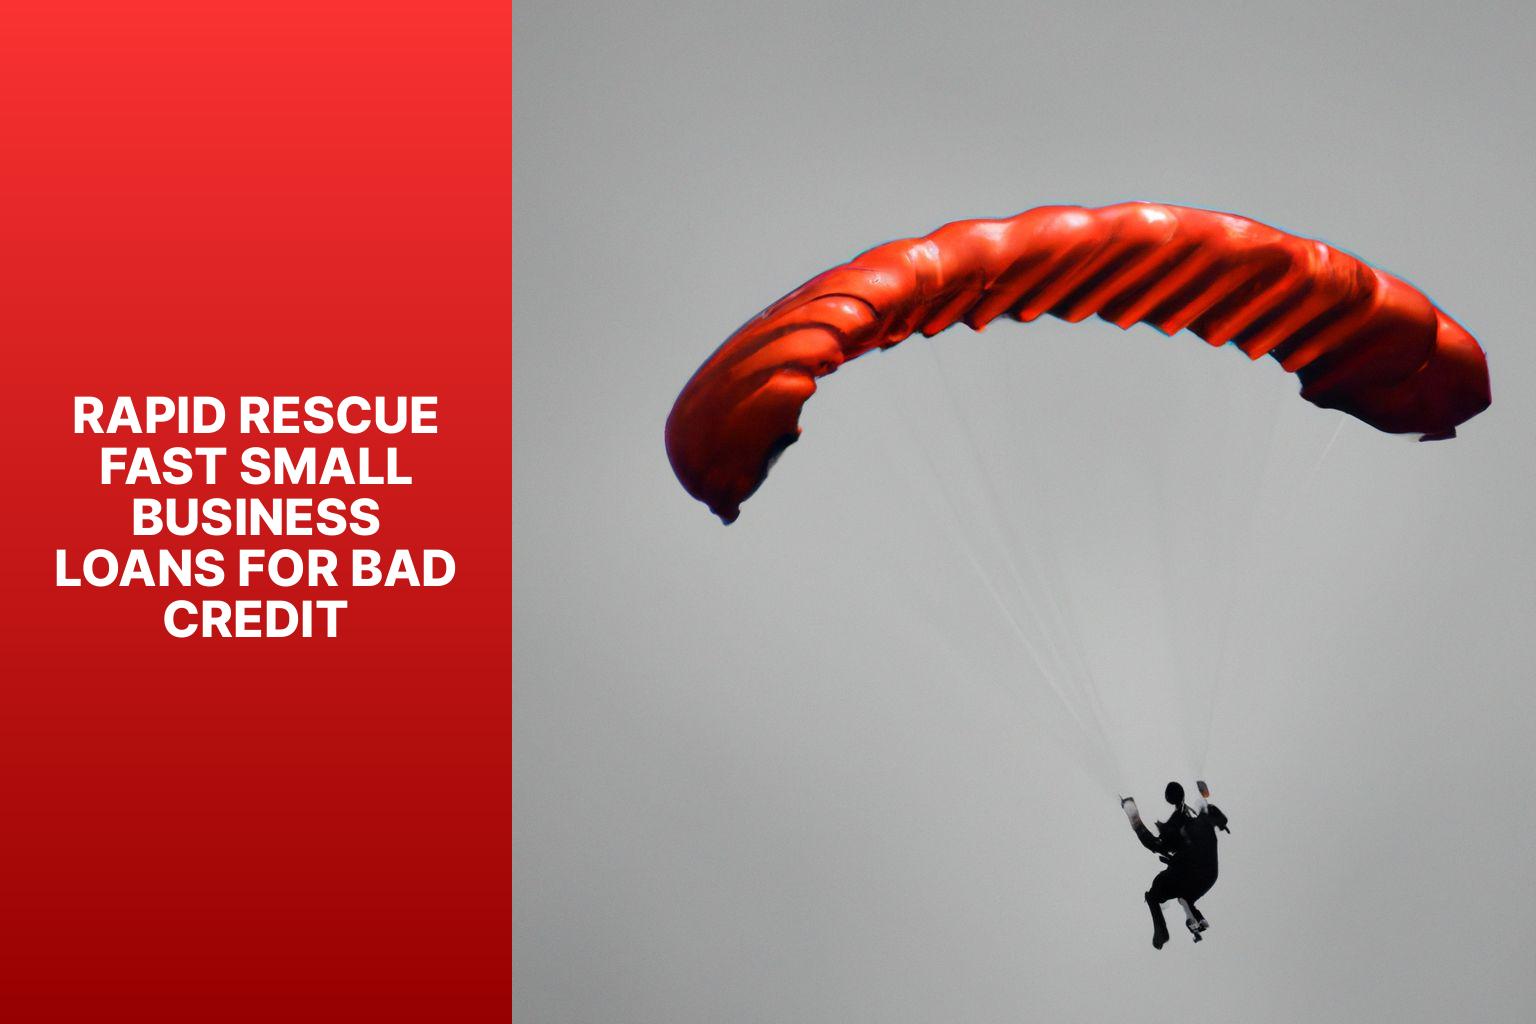 Rapid Rescue Fast Small Business Loans for Bad Credit